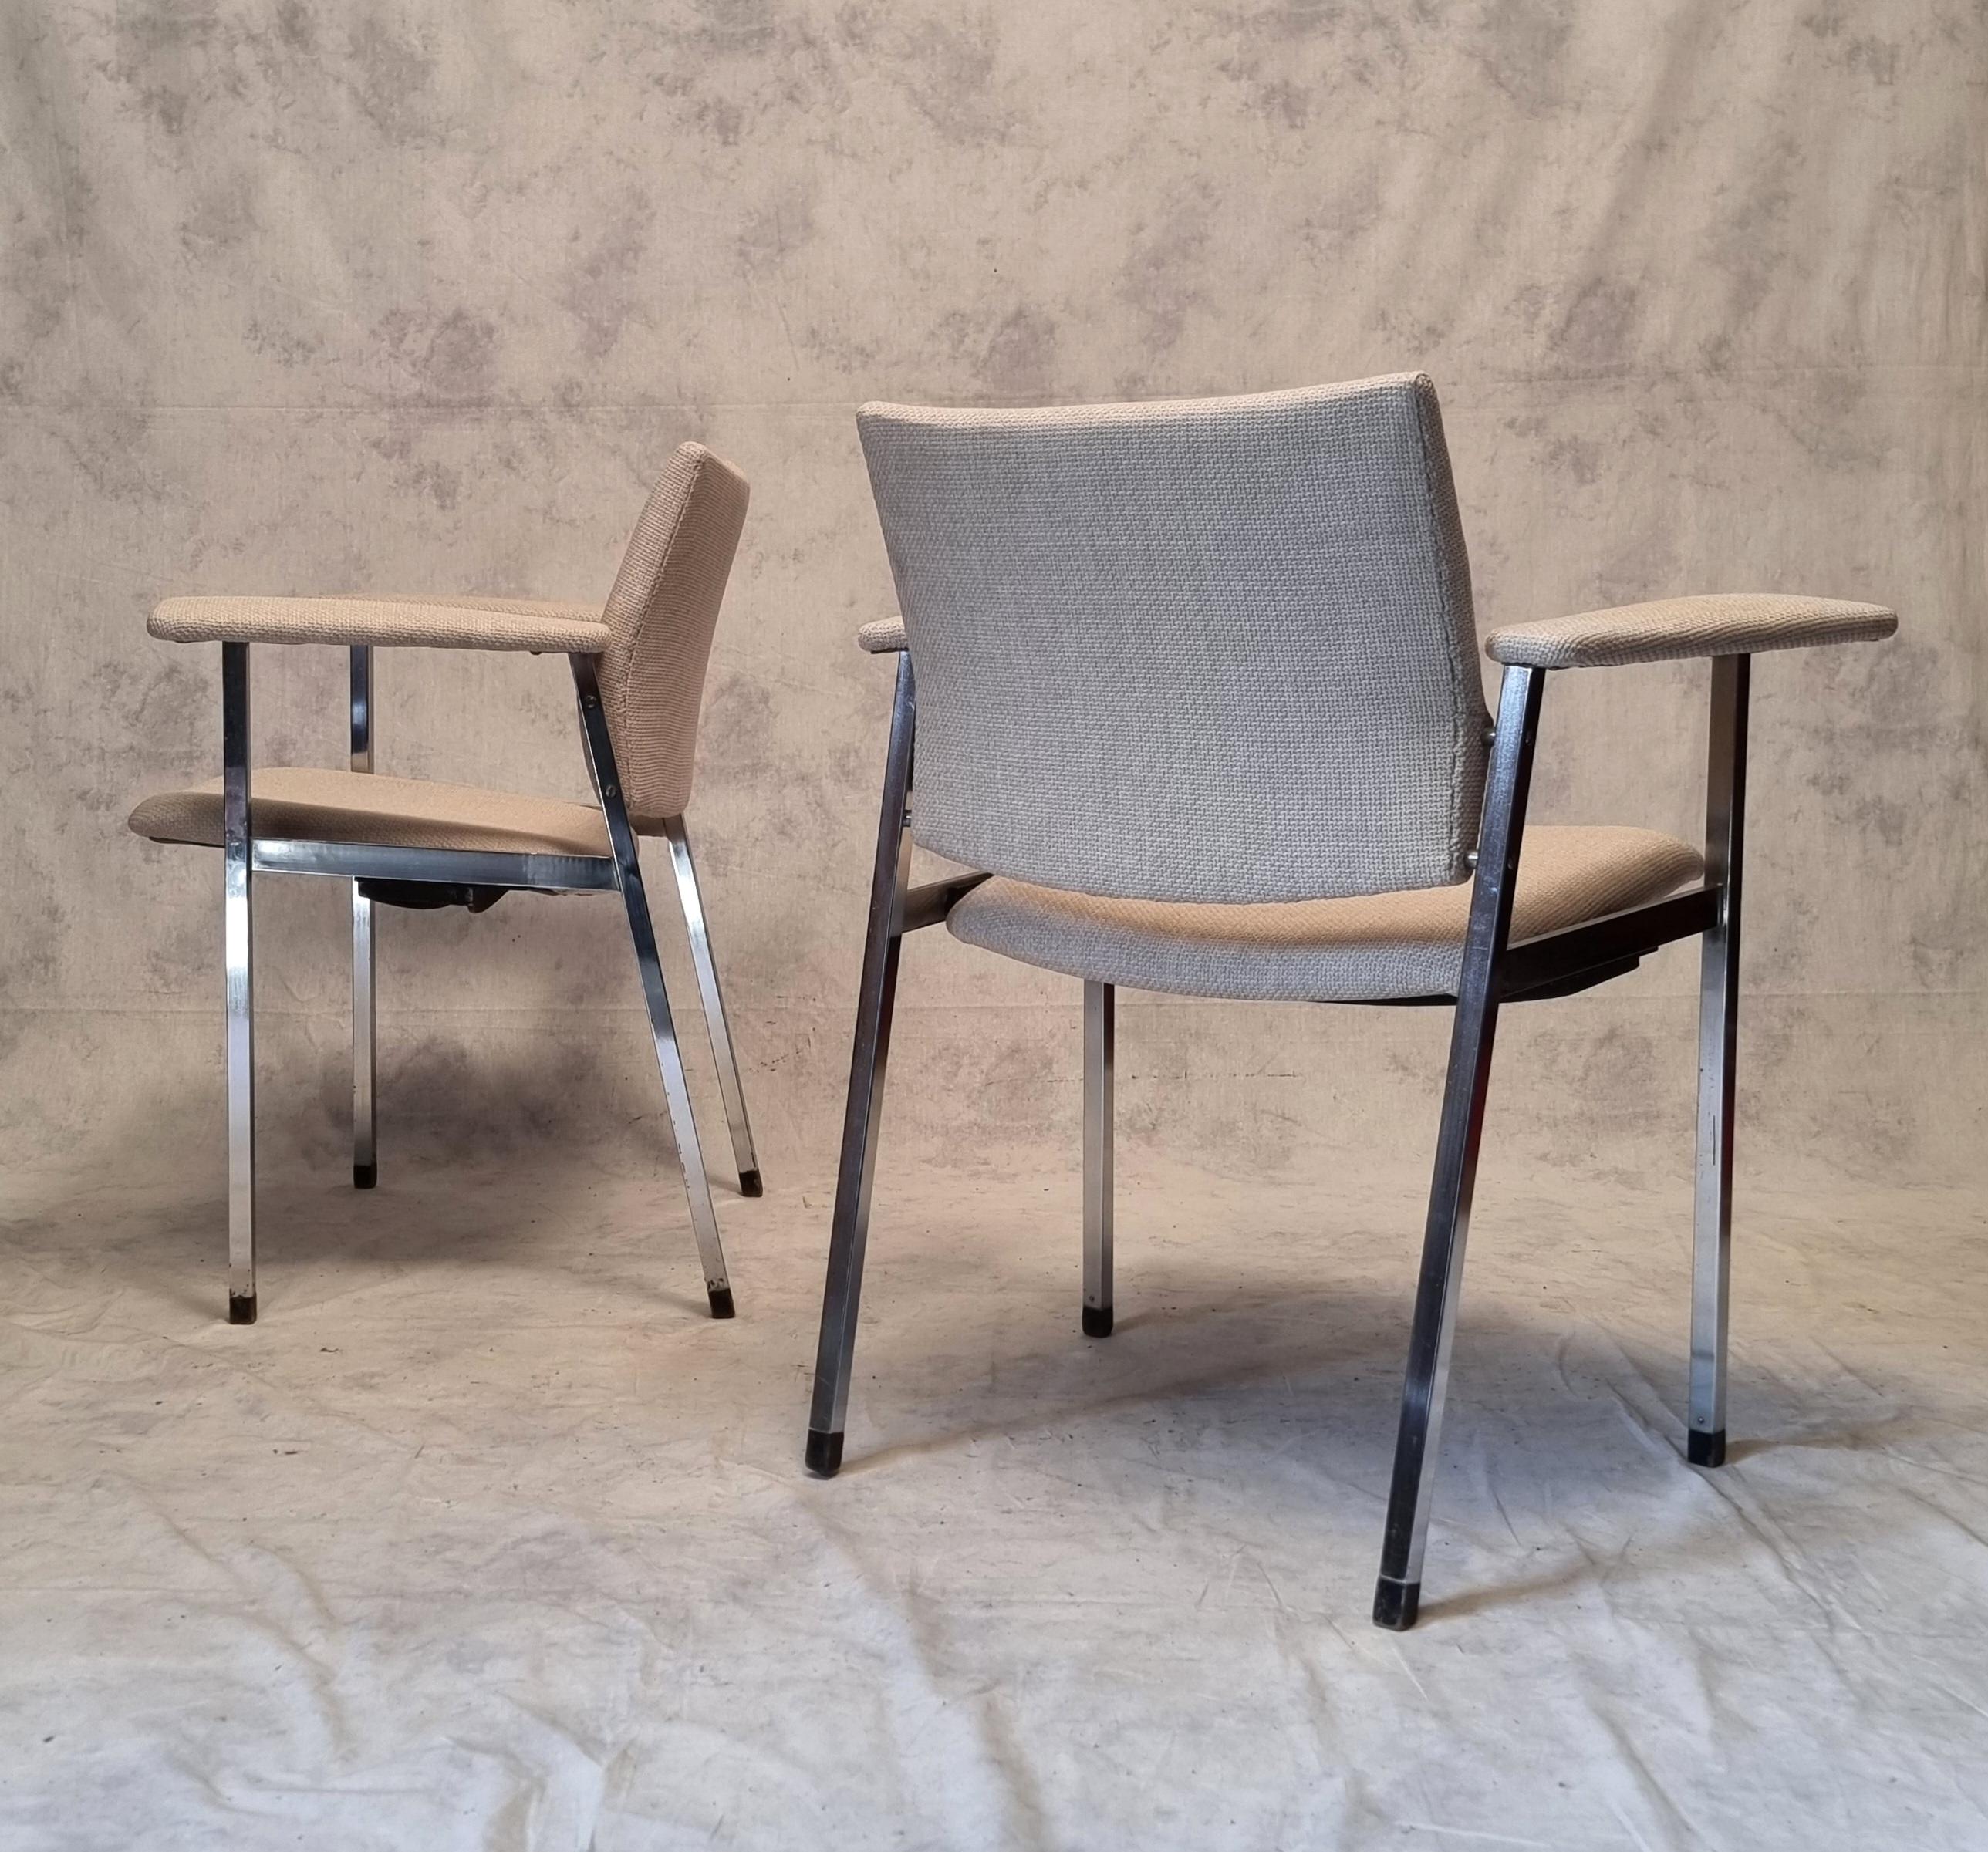 Late 20th Century Pair Of Folding Seat Armchairs, Fritz Hansen, Chromed Metal, circa 1970 For Sale